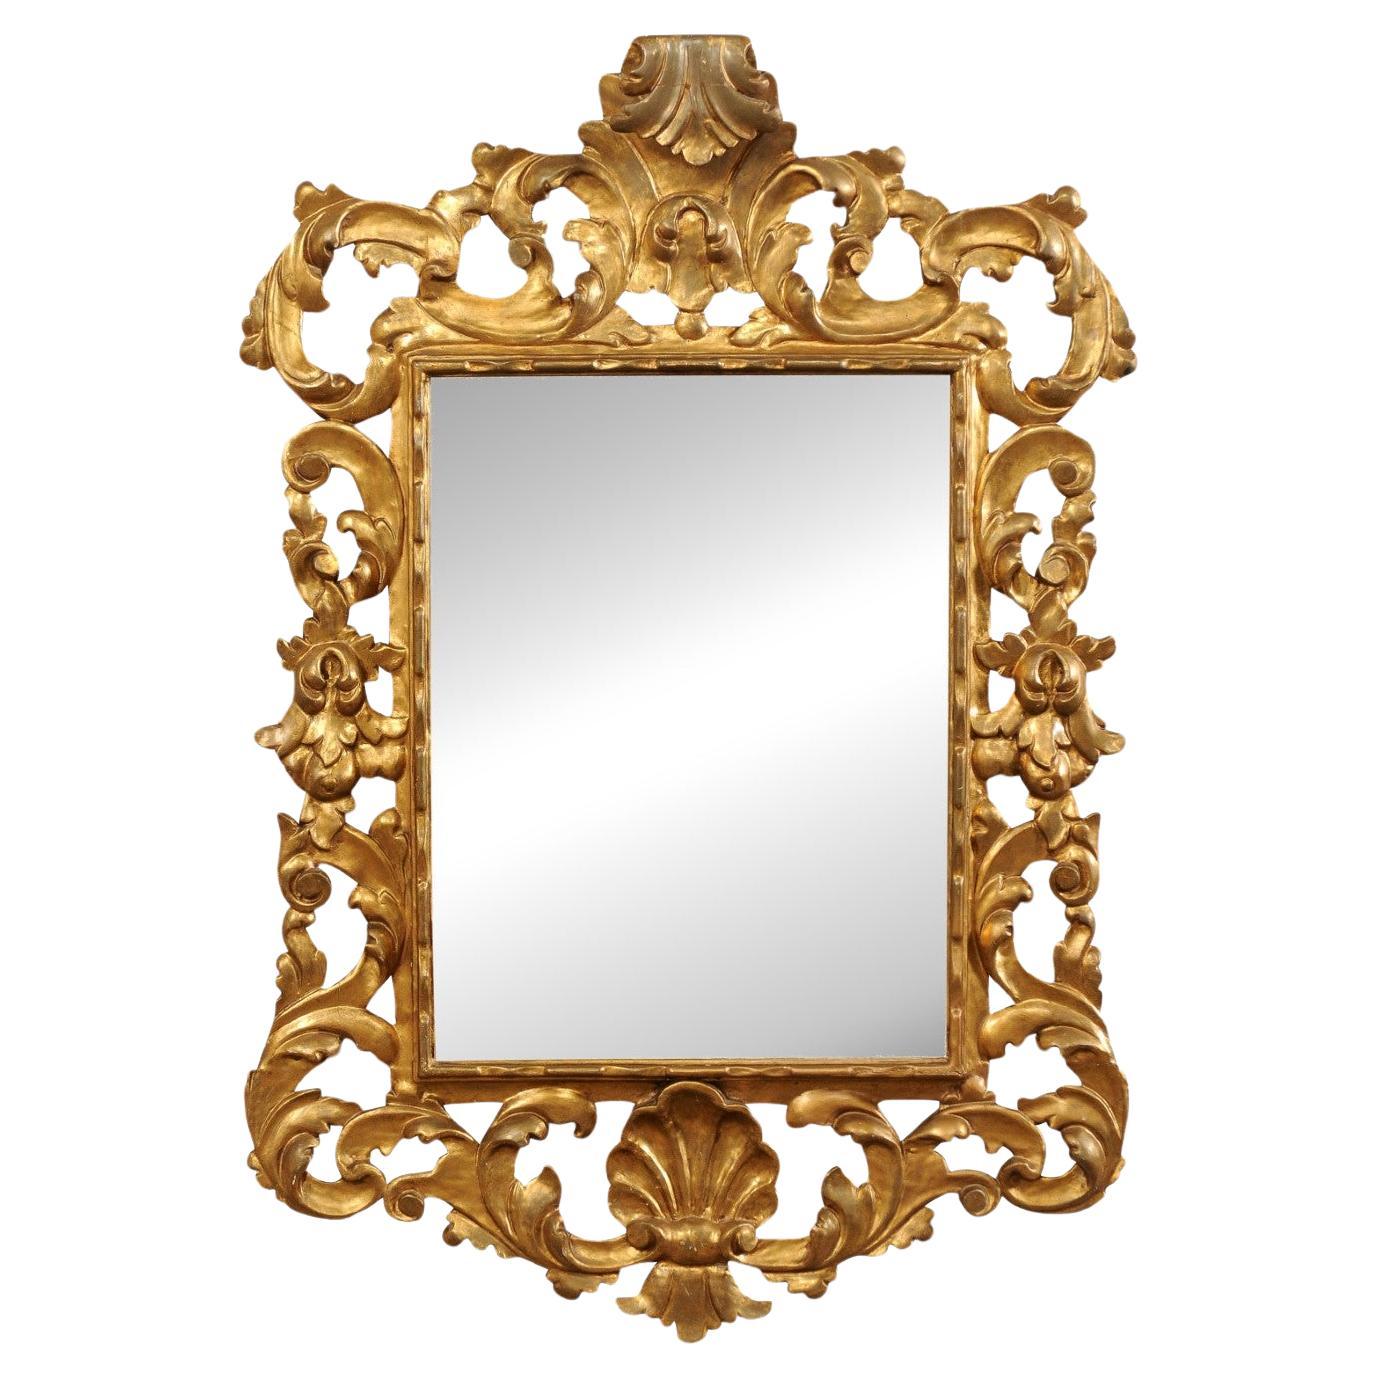 French Rococo Style Carved & Gilt 4.75 Ft Tall Mirror, 19th C.